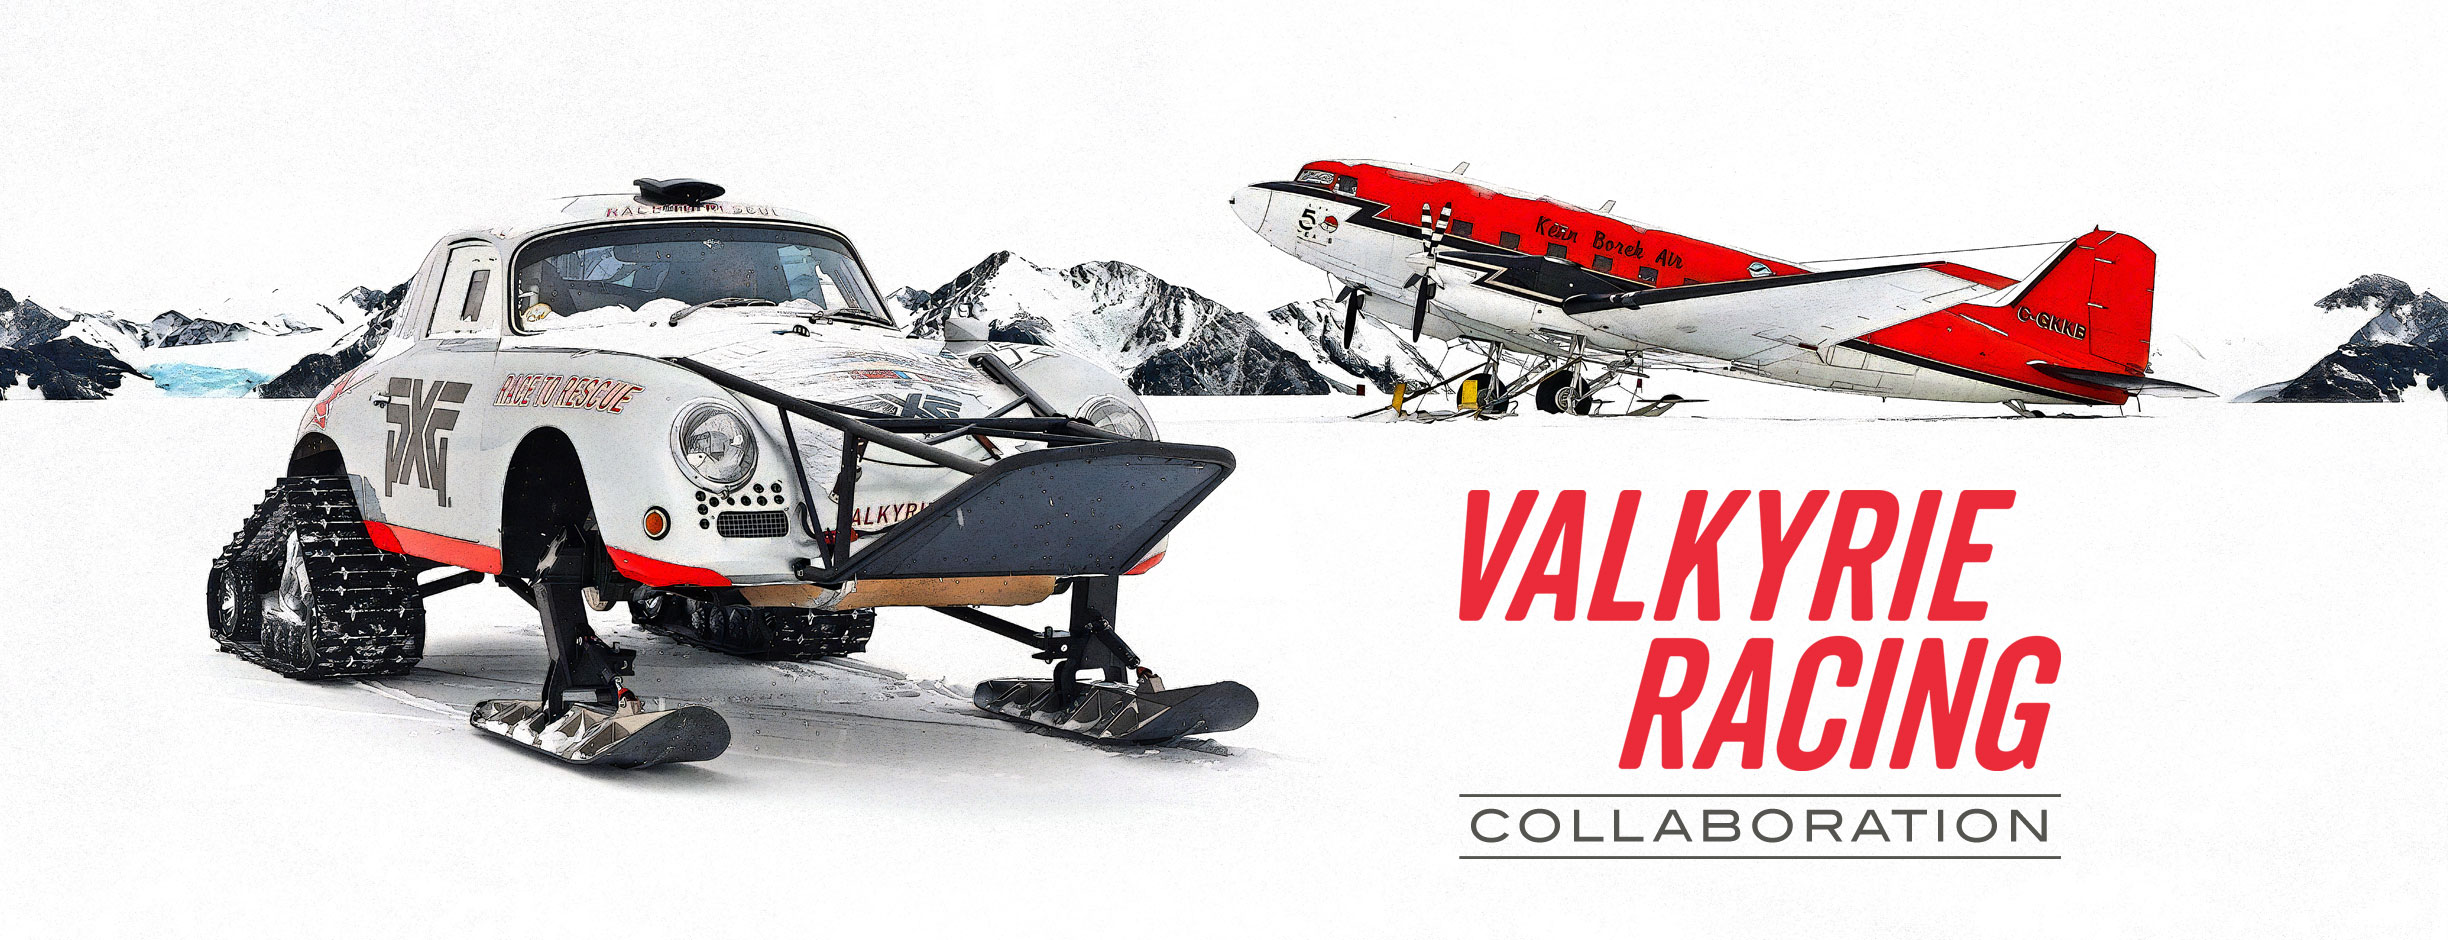 Valkyrie Racing Collaboration